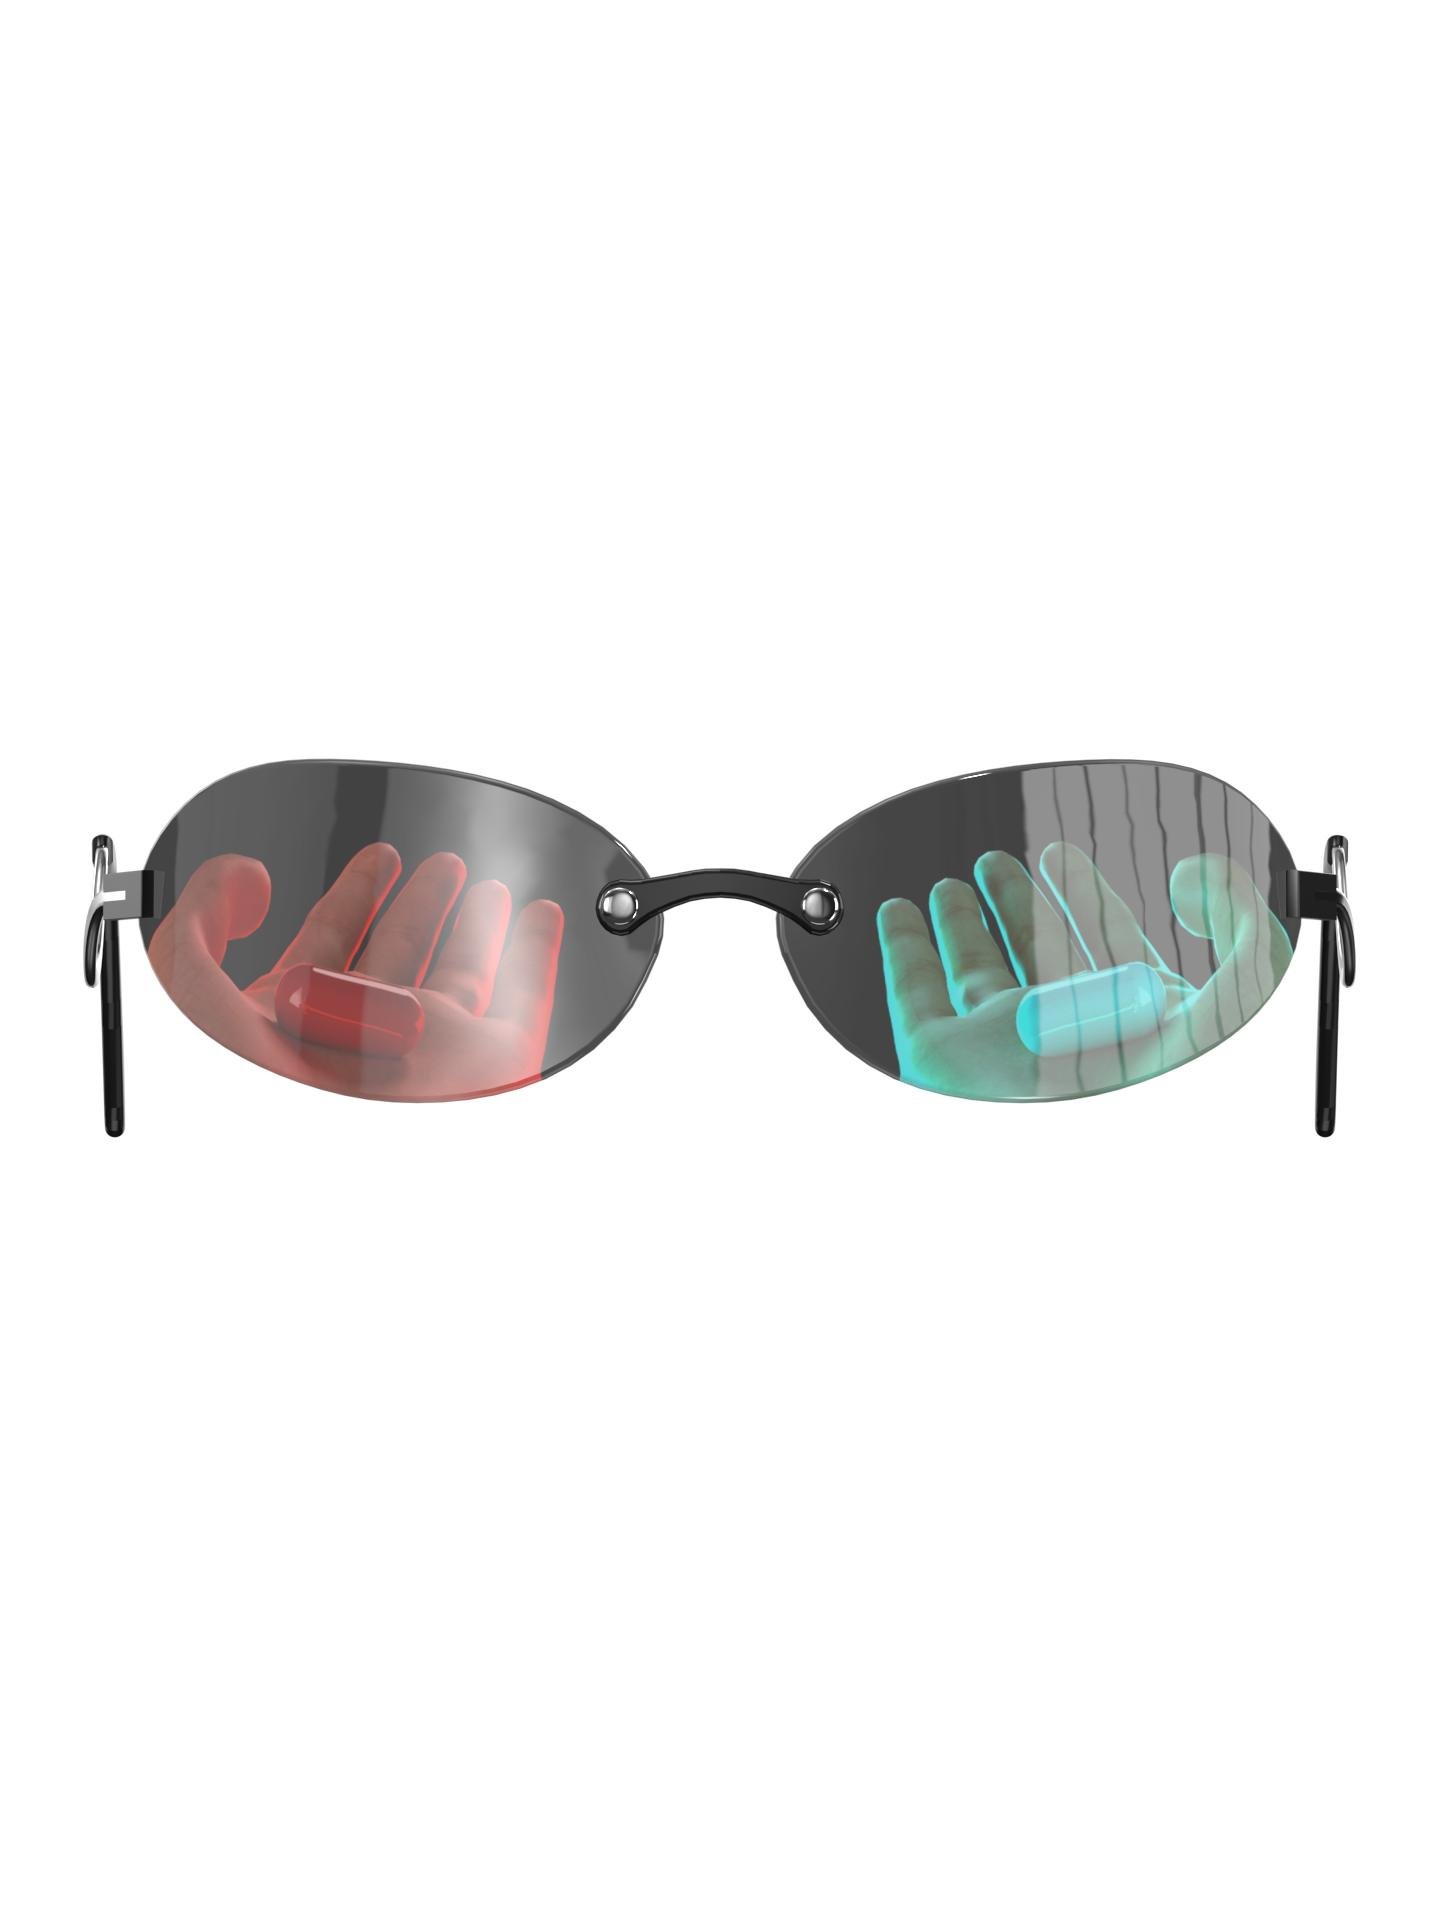 Red pill blue pill glasses by DRESSX